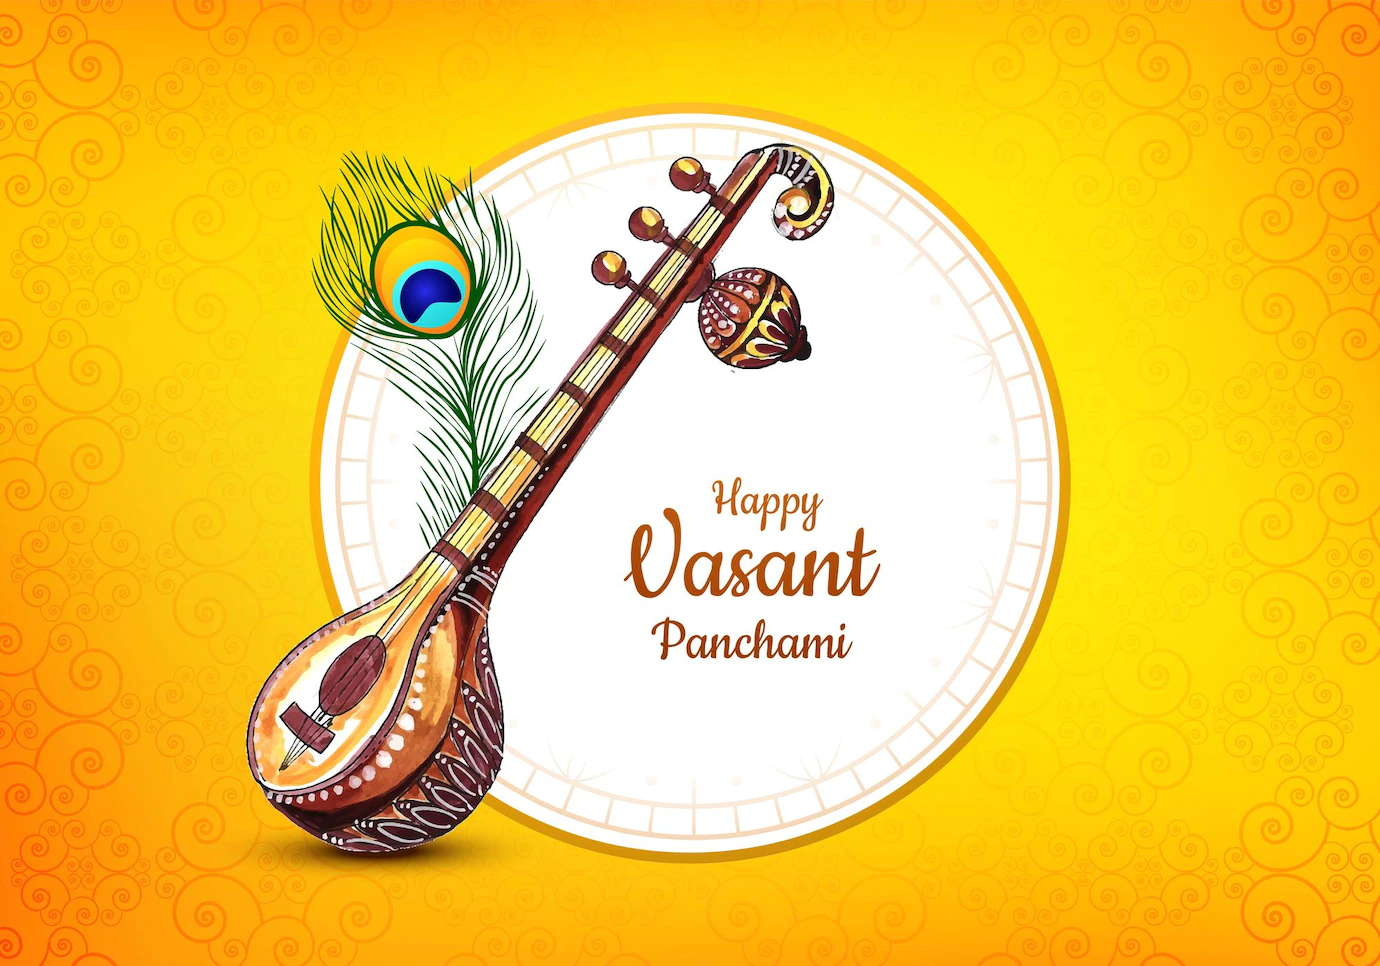 Collection of Amazing Full 4K Vasant Panchami Images Over 999+